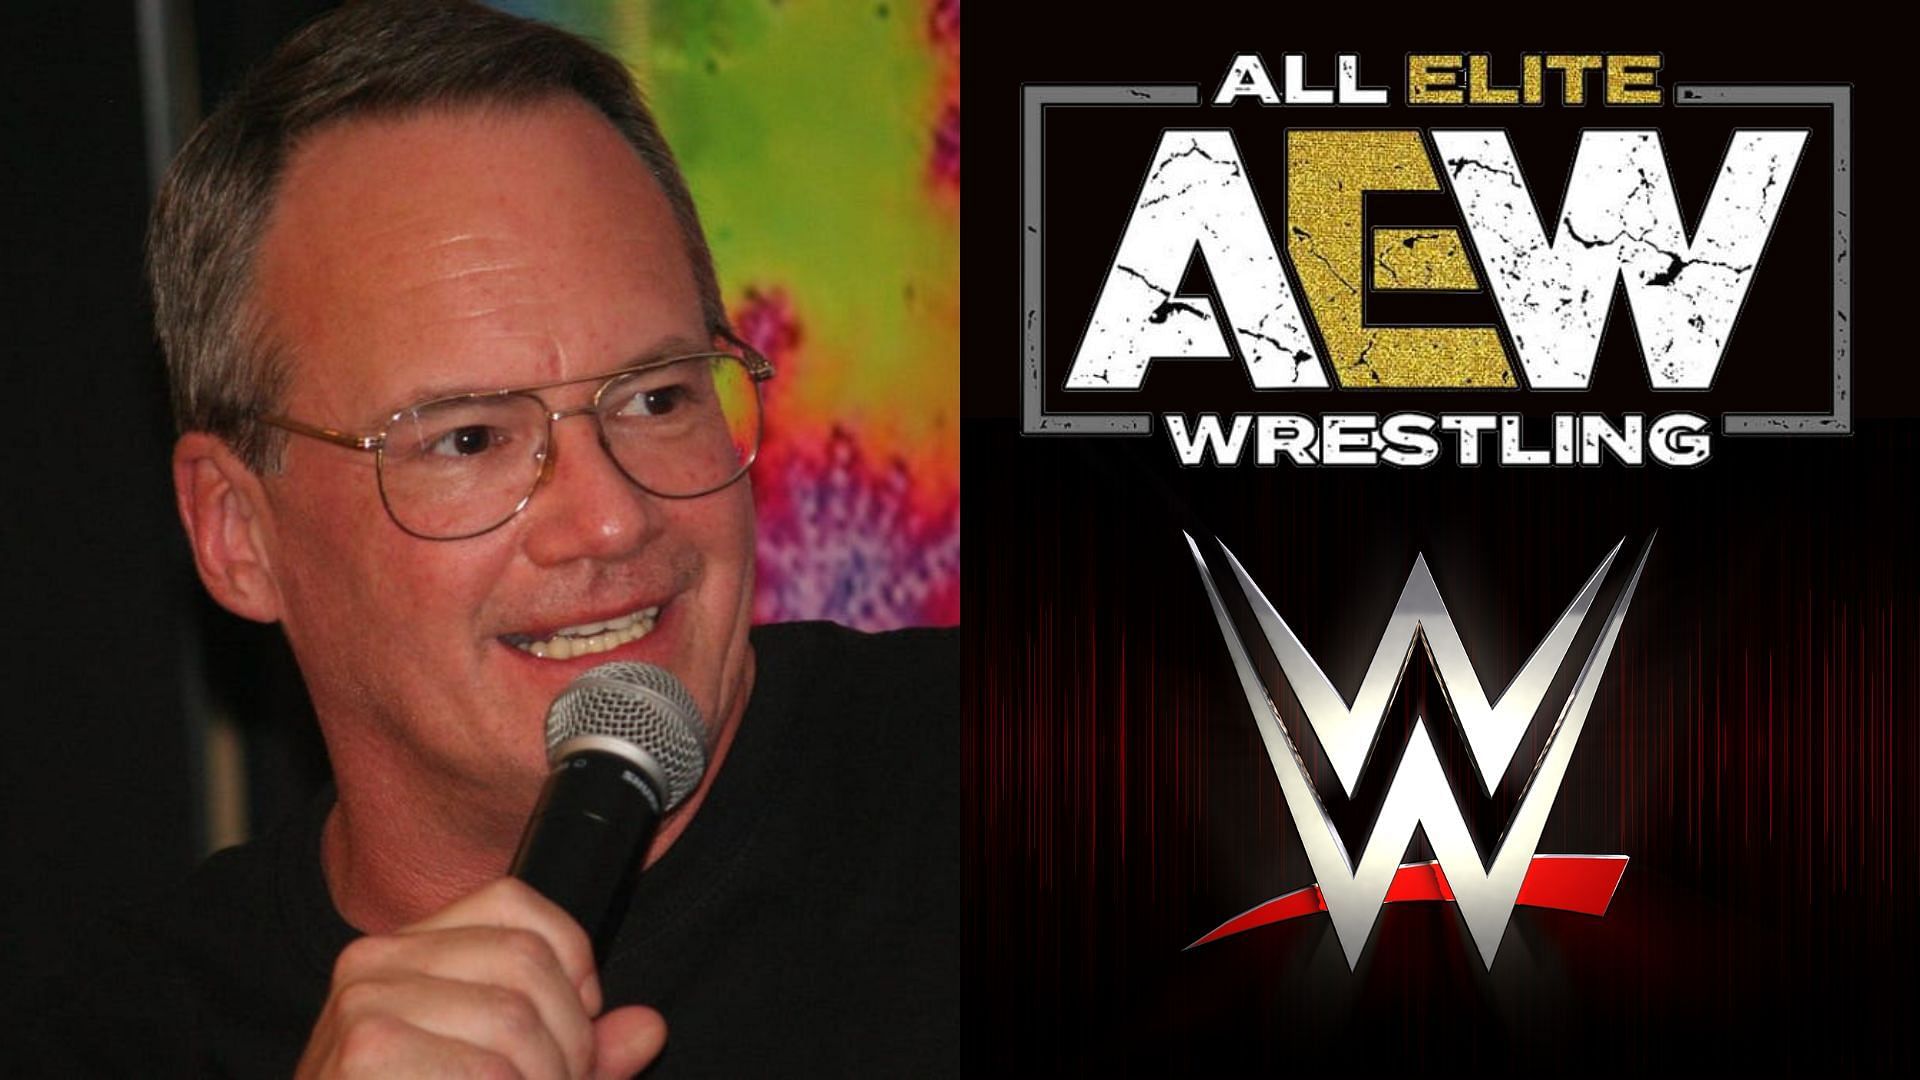 Jim Cornette dropped some interesting opinions recently